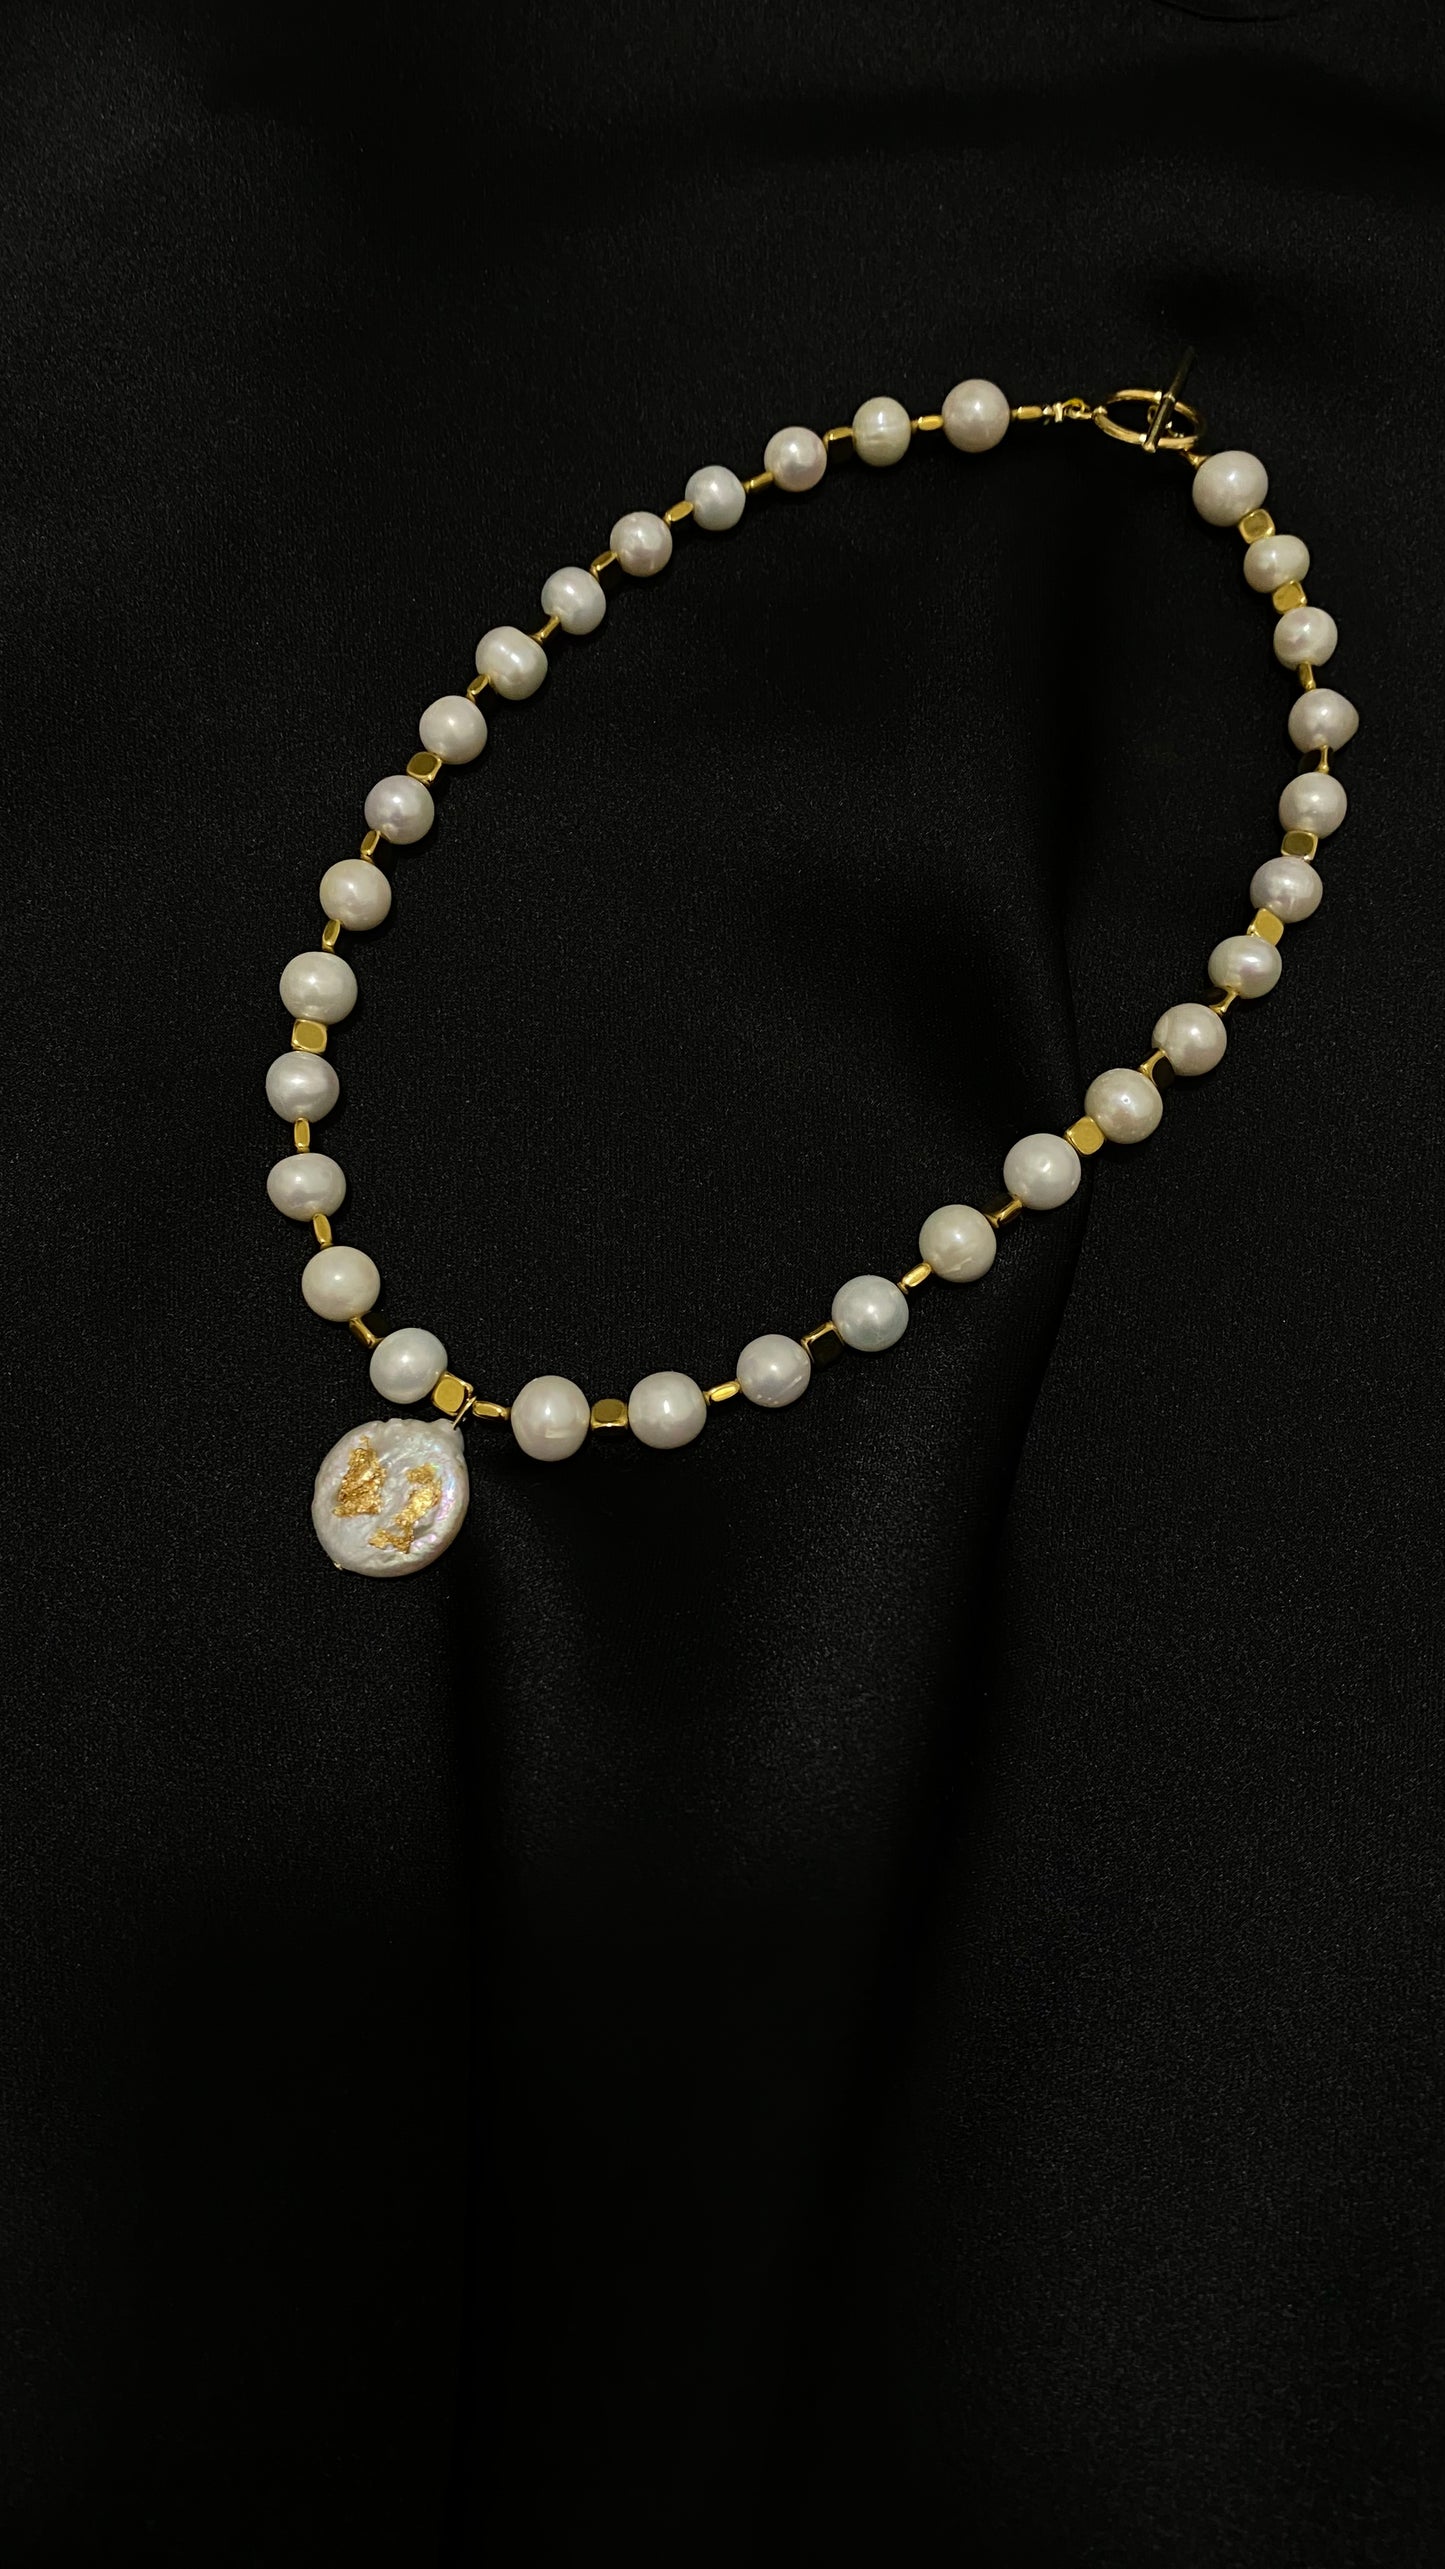 White pearl necklace with pendant